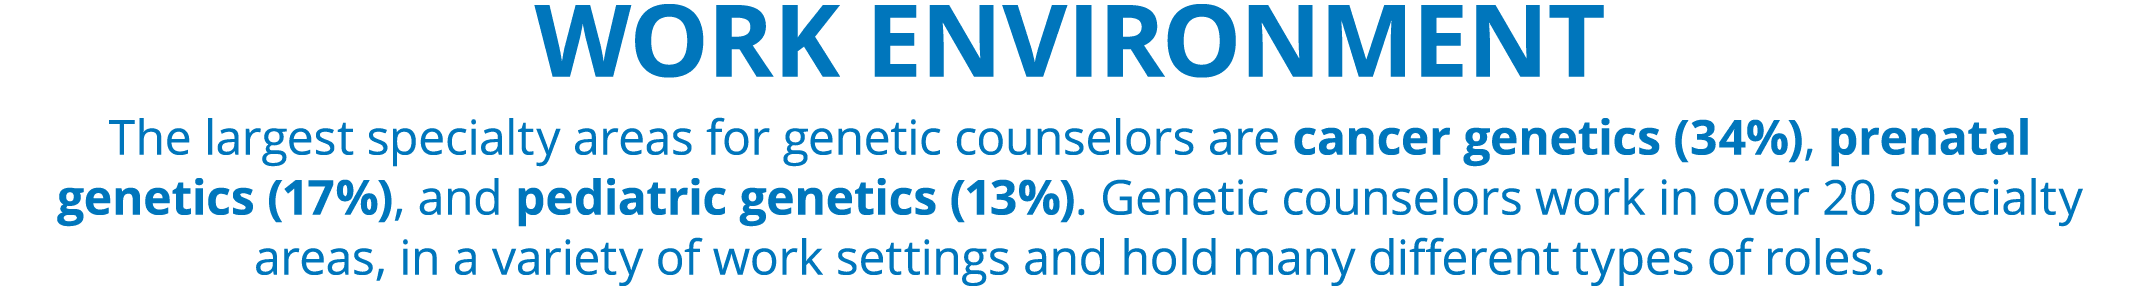 Work Environment The largest specialty areas for genetic counselors are cancer genetics (34%), prenatal genetics (17%...